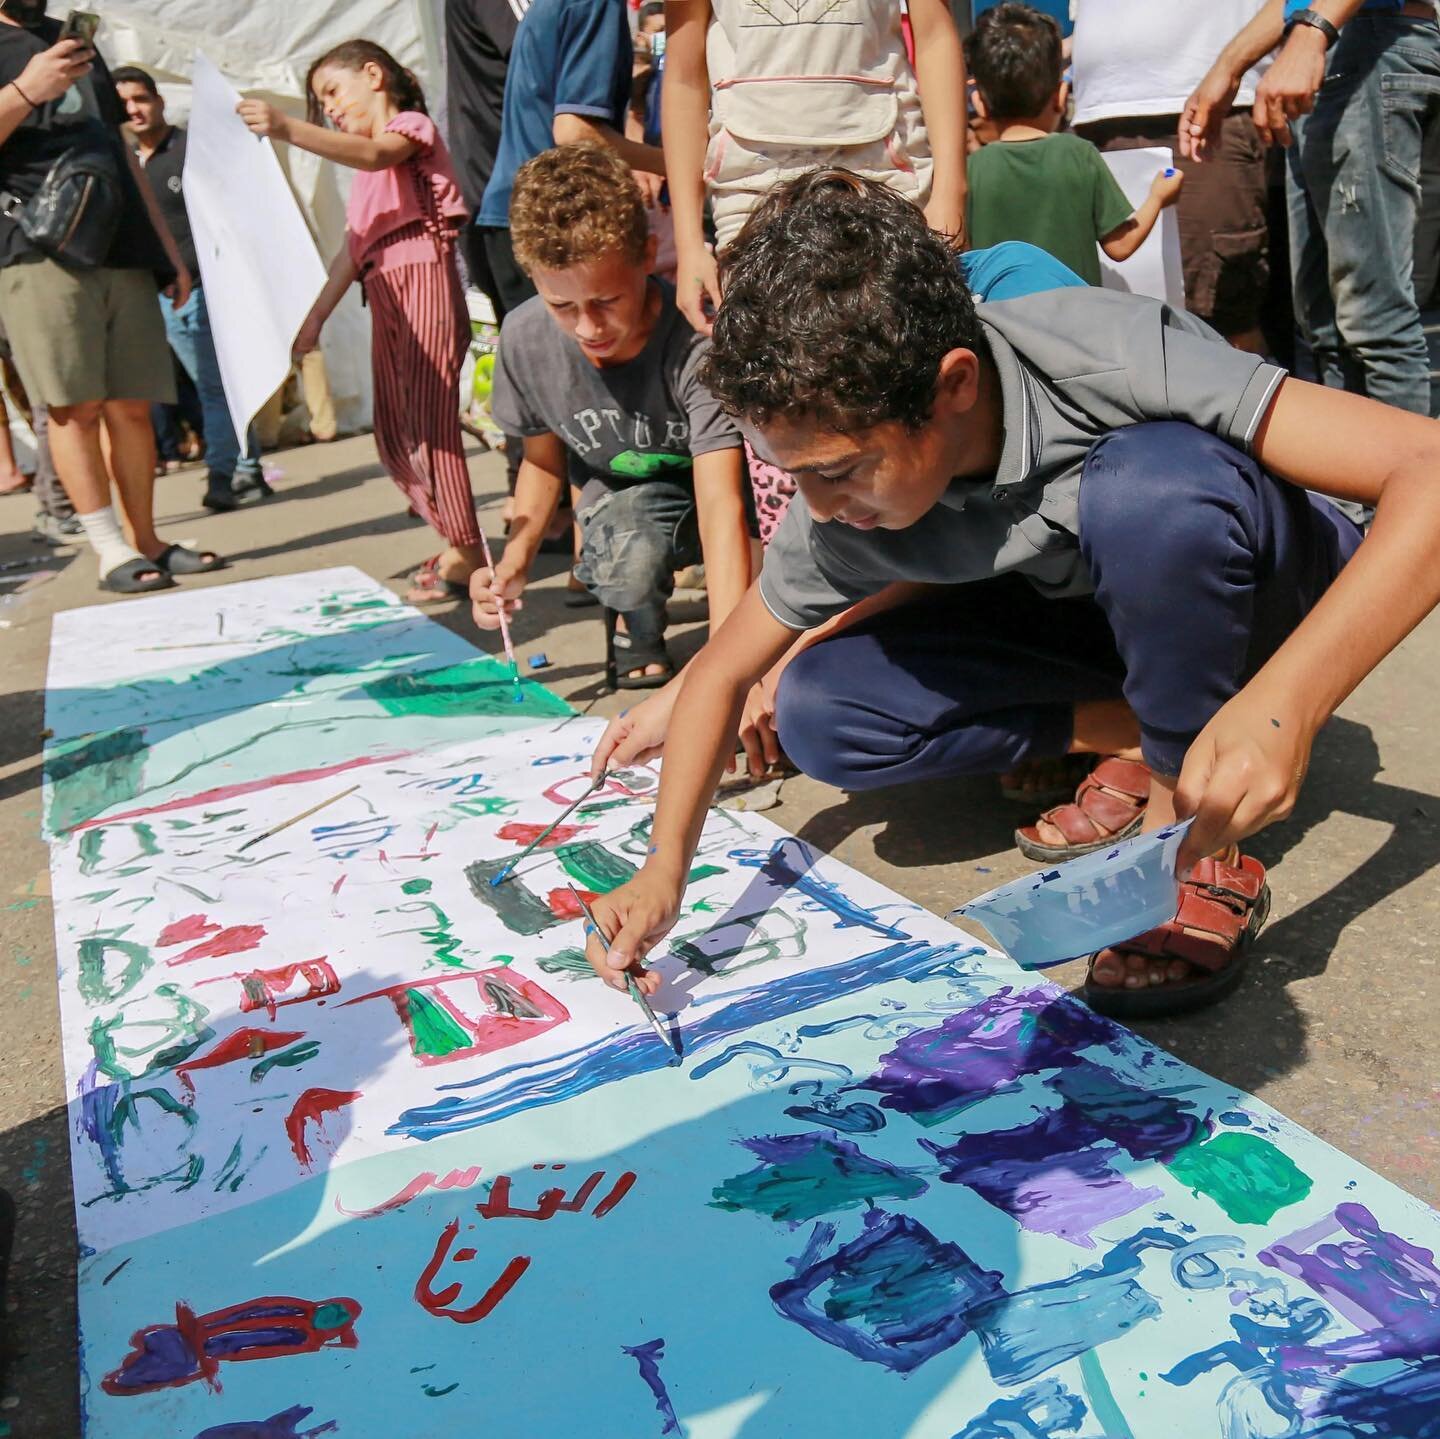 In Gaza, children are making art to heal and express themselves amid the war. Nadim Hamed Jad and a group of youth activists have organized four painting events in al-Shifa Hospital.

&ldquo;We know that this will not solve their trauma, but it&rsquo